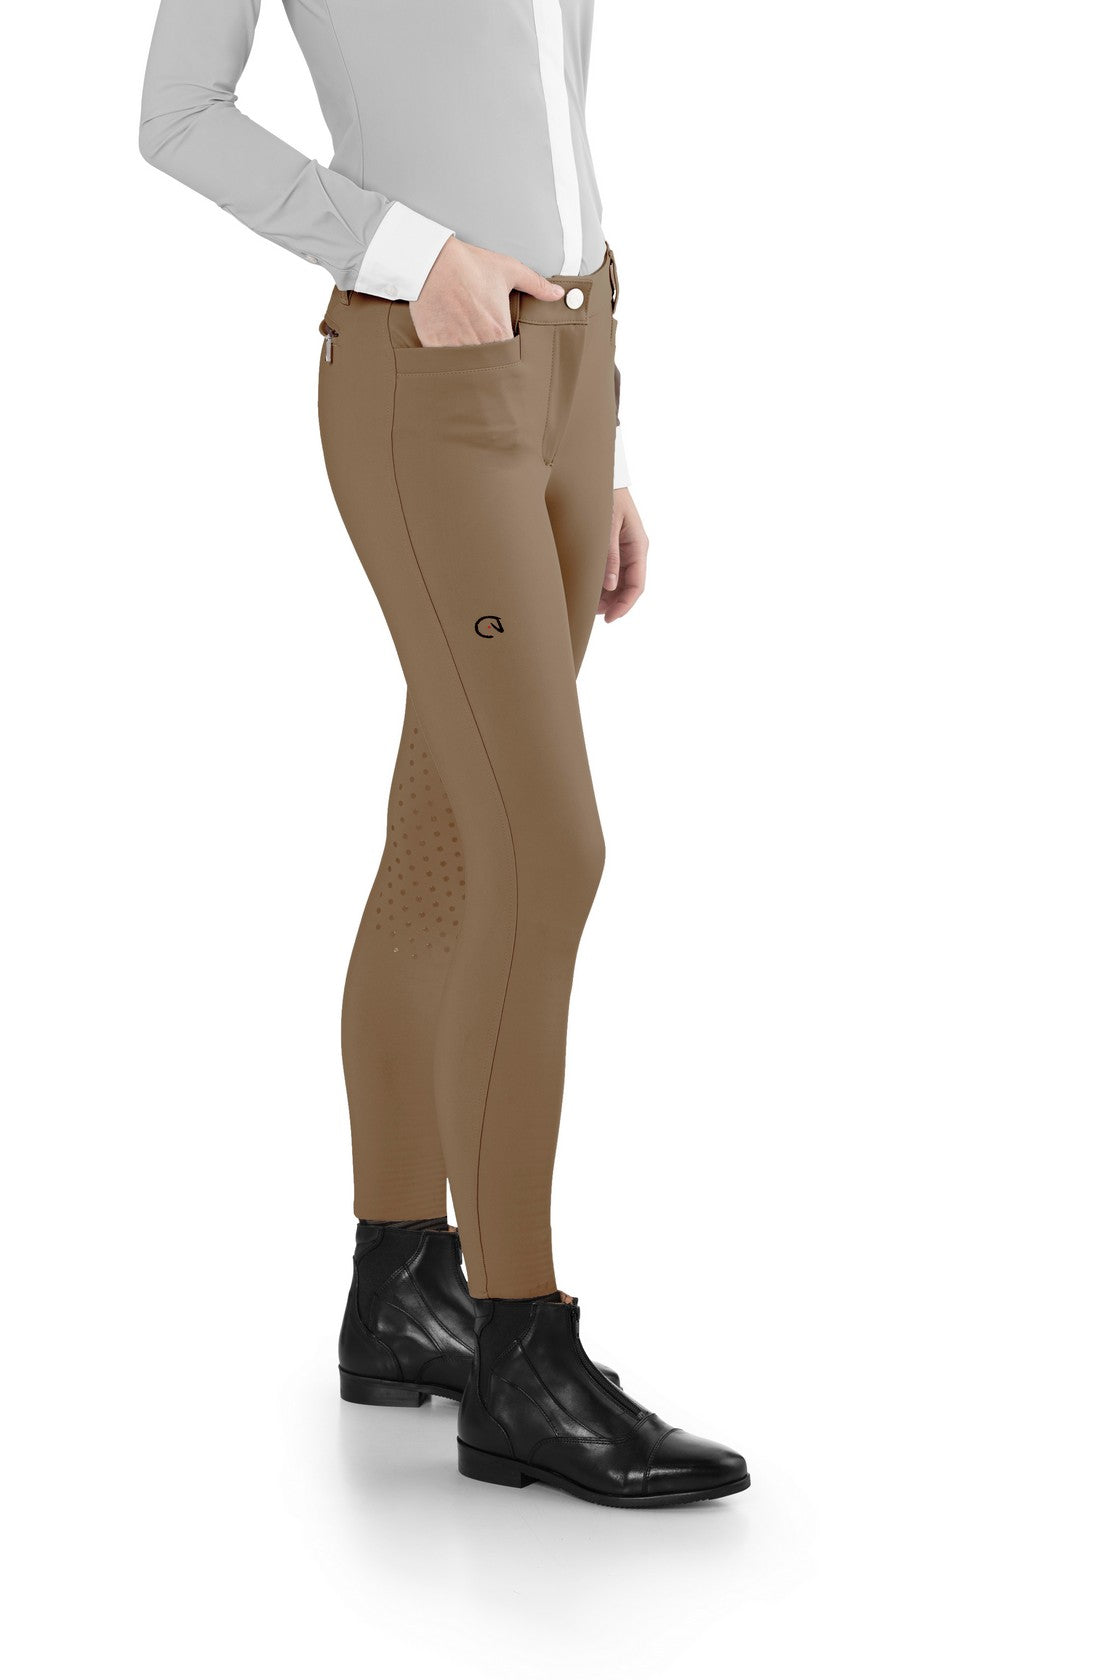 horseback riding breeches with knee grip for women